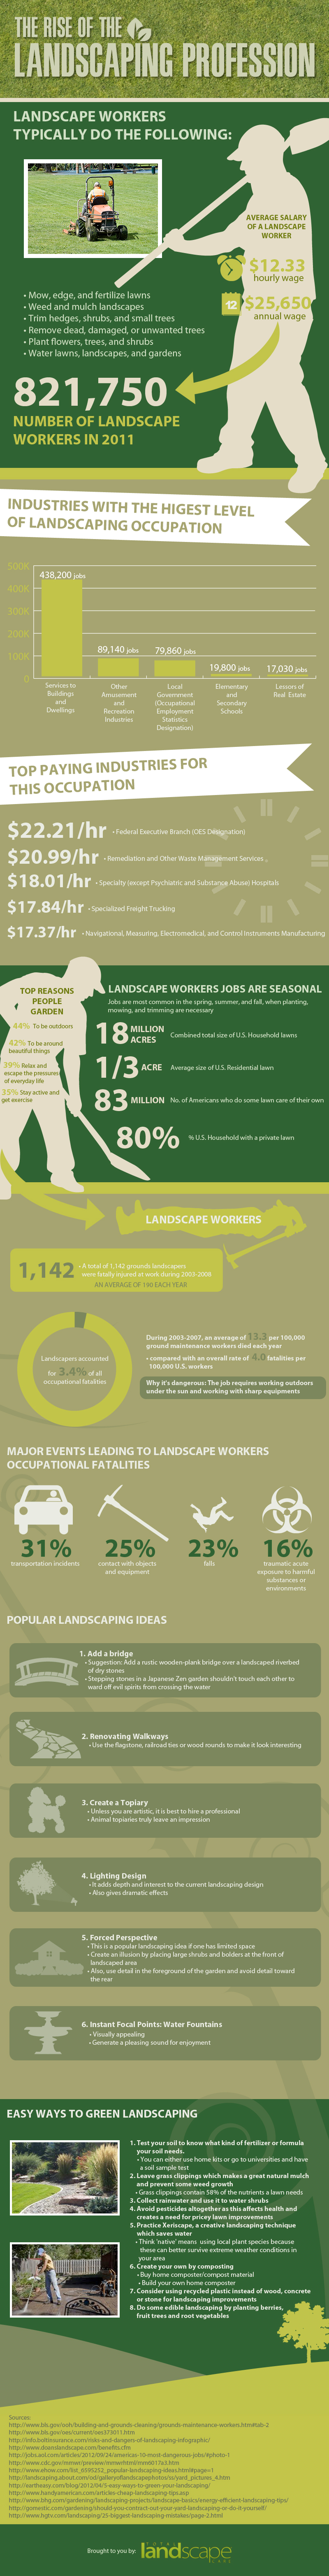 The Rise of the Landscaping Profession